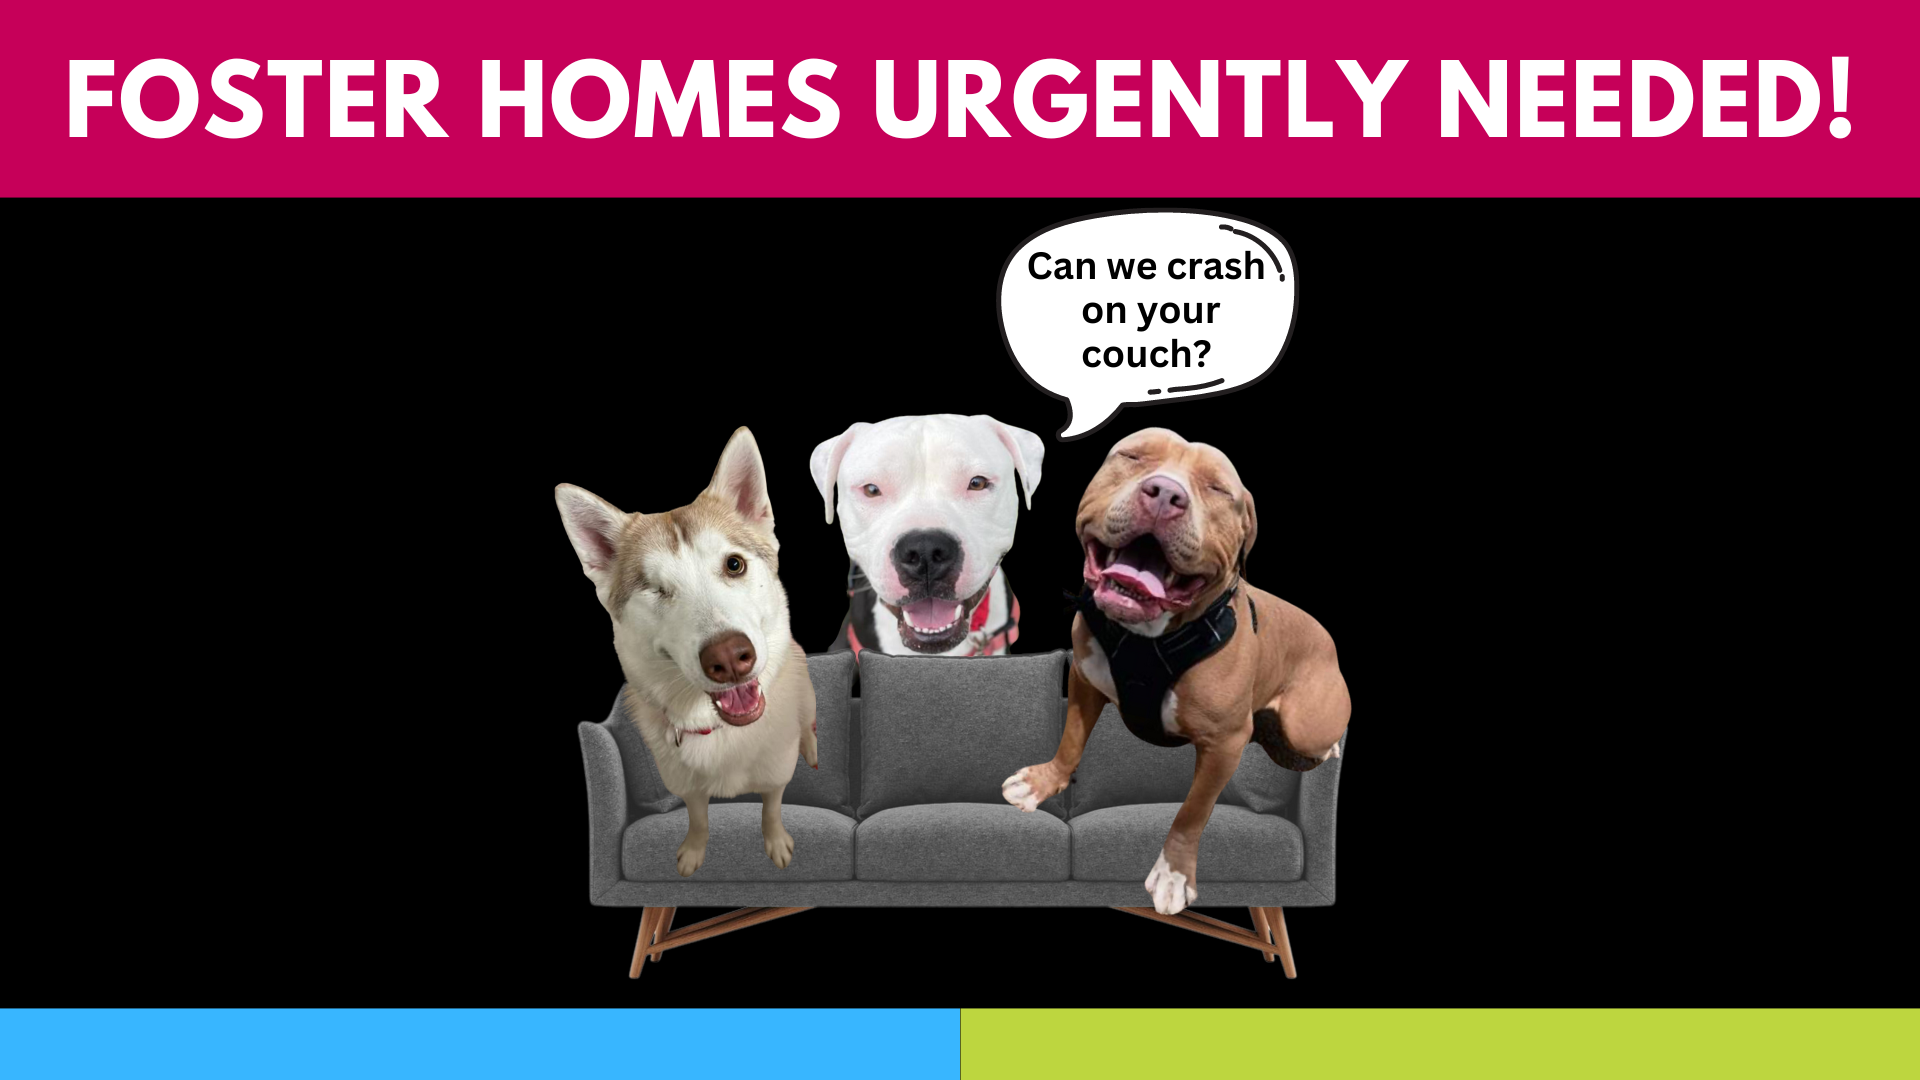 Graphic with three dogs sitting on a couch. Text banner above reads FOSTER HOMES URGENTLY NEEDED! Speech bubble reads "Can we crash on your couch?"